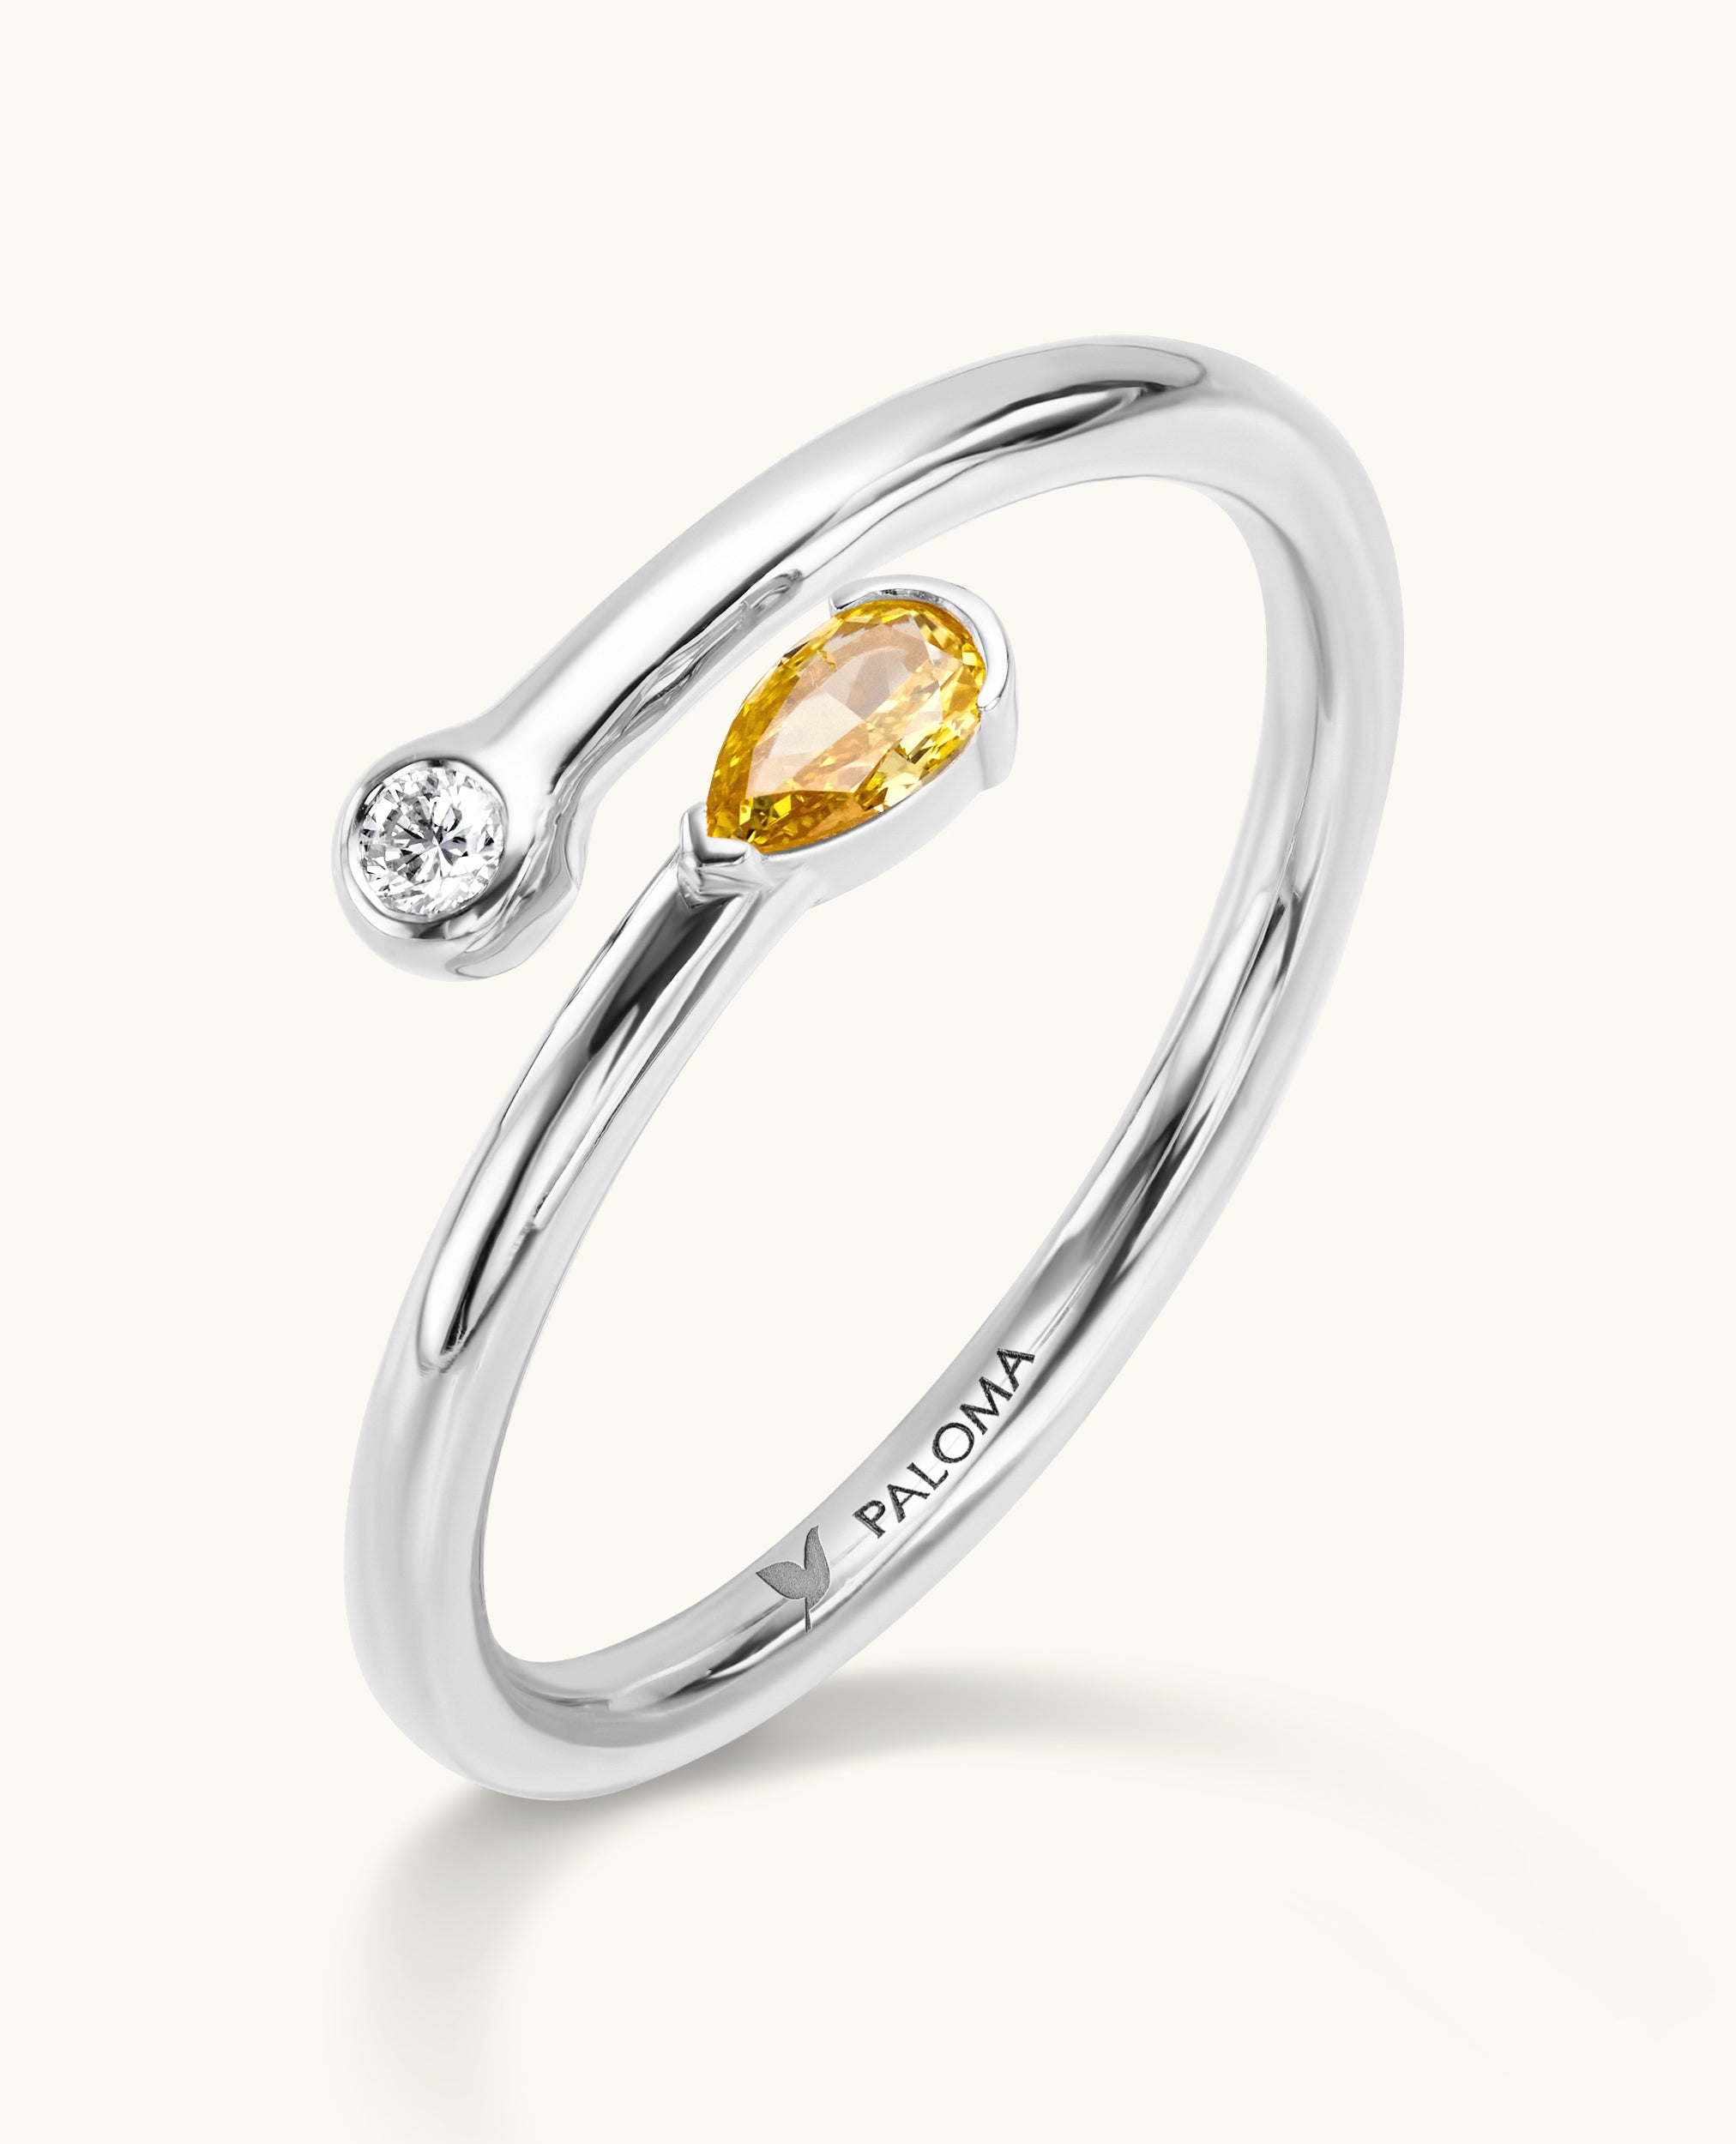 2-Toned Fancy Color Yellow and White Diamond Wrap Ring